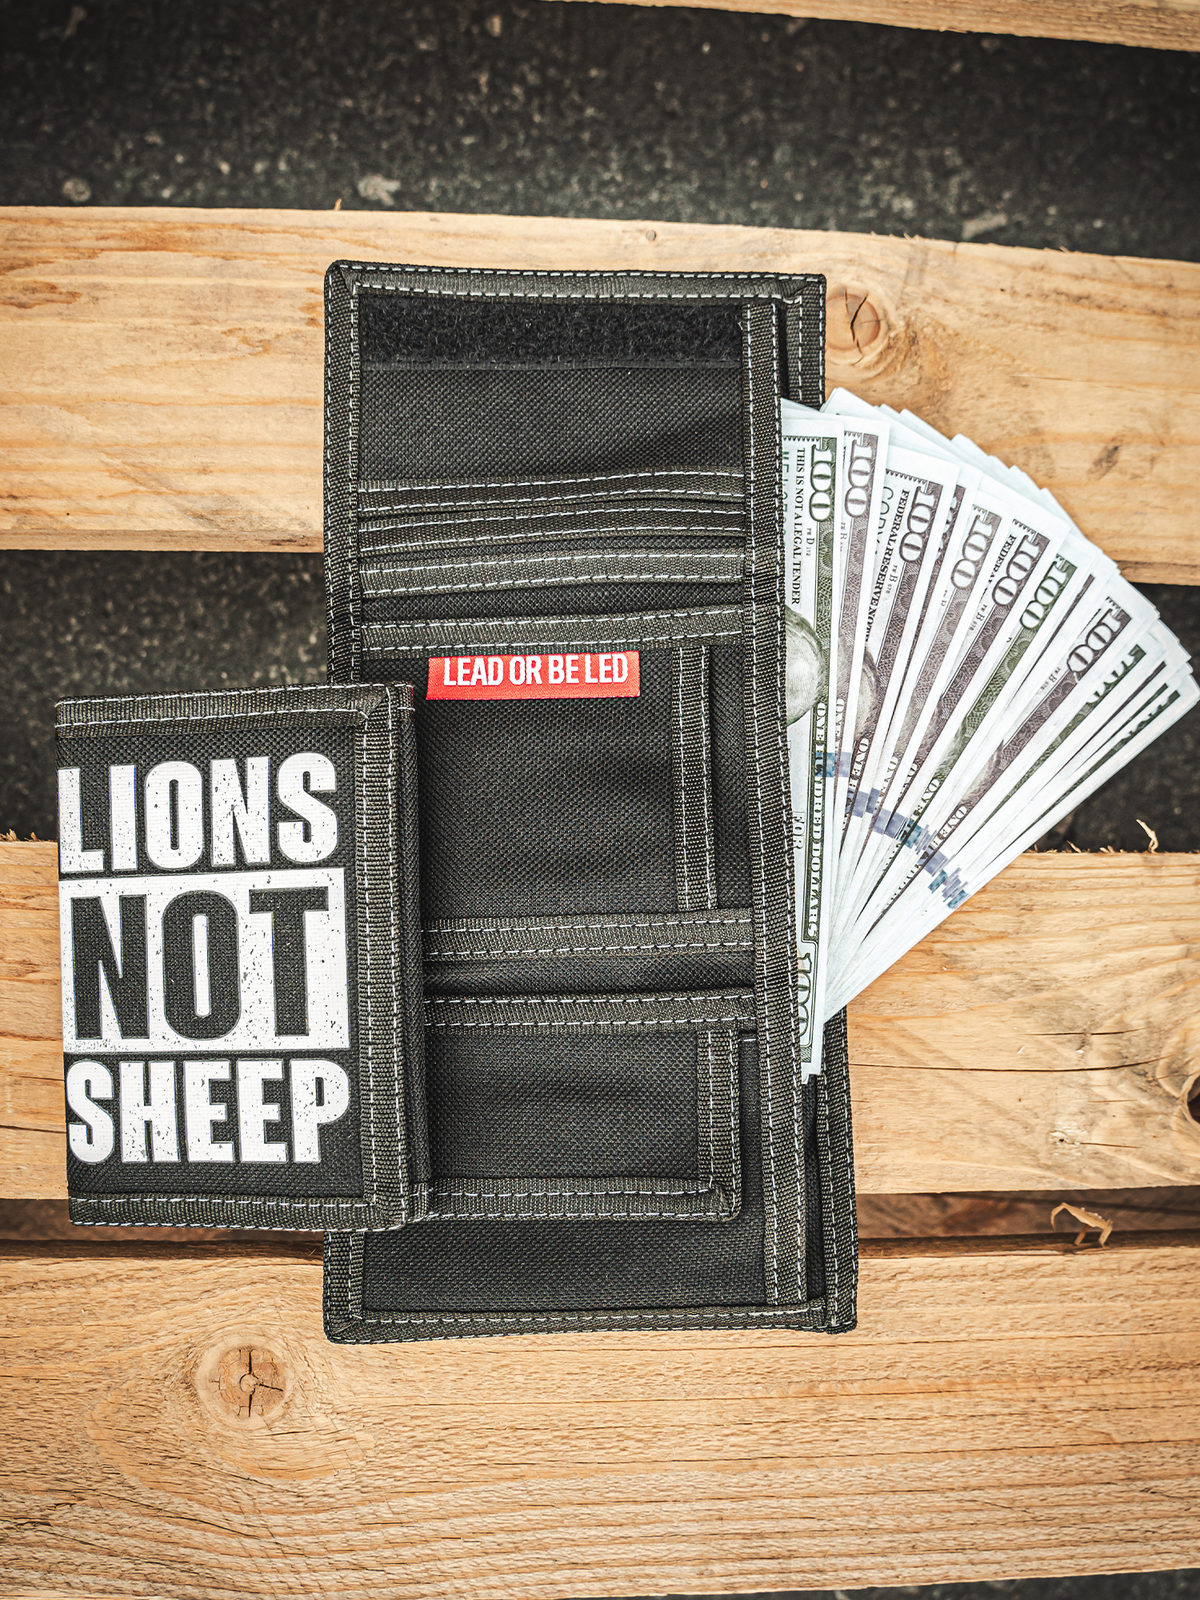 &quot;STRAIGHT OUTTA&quot; Velcro Wallet - Lions Not Sheep ®